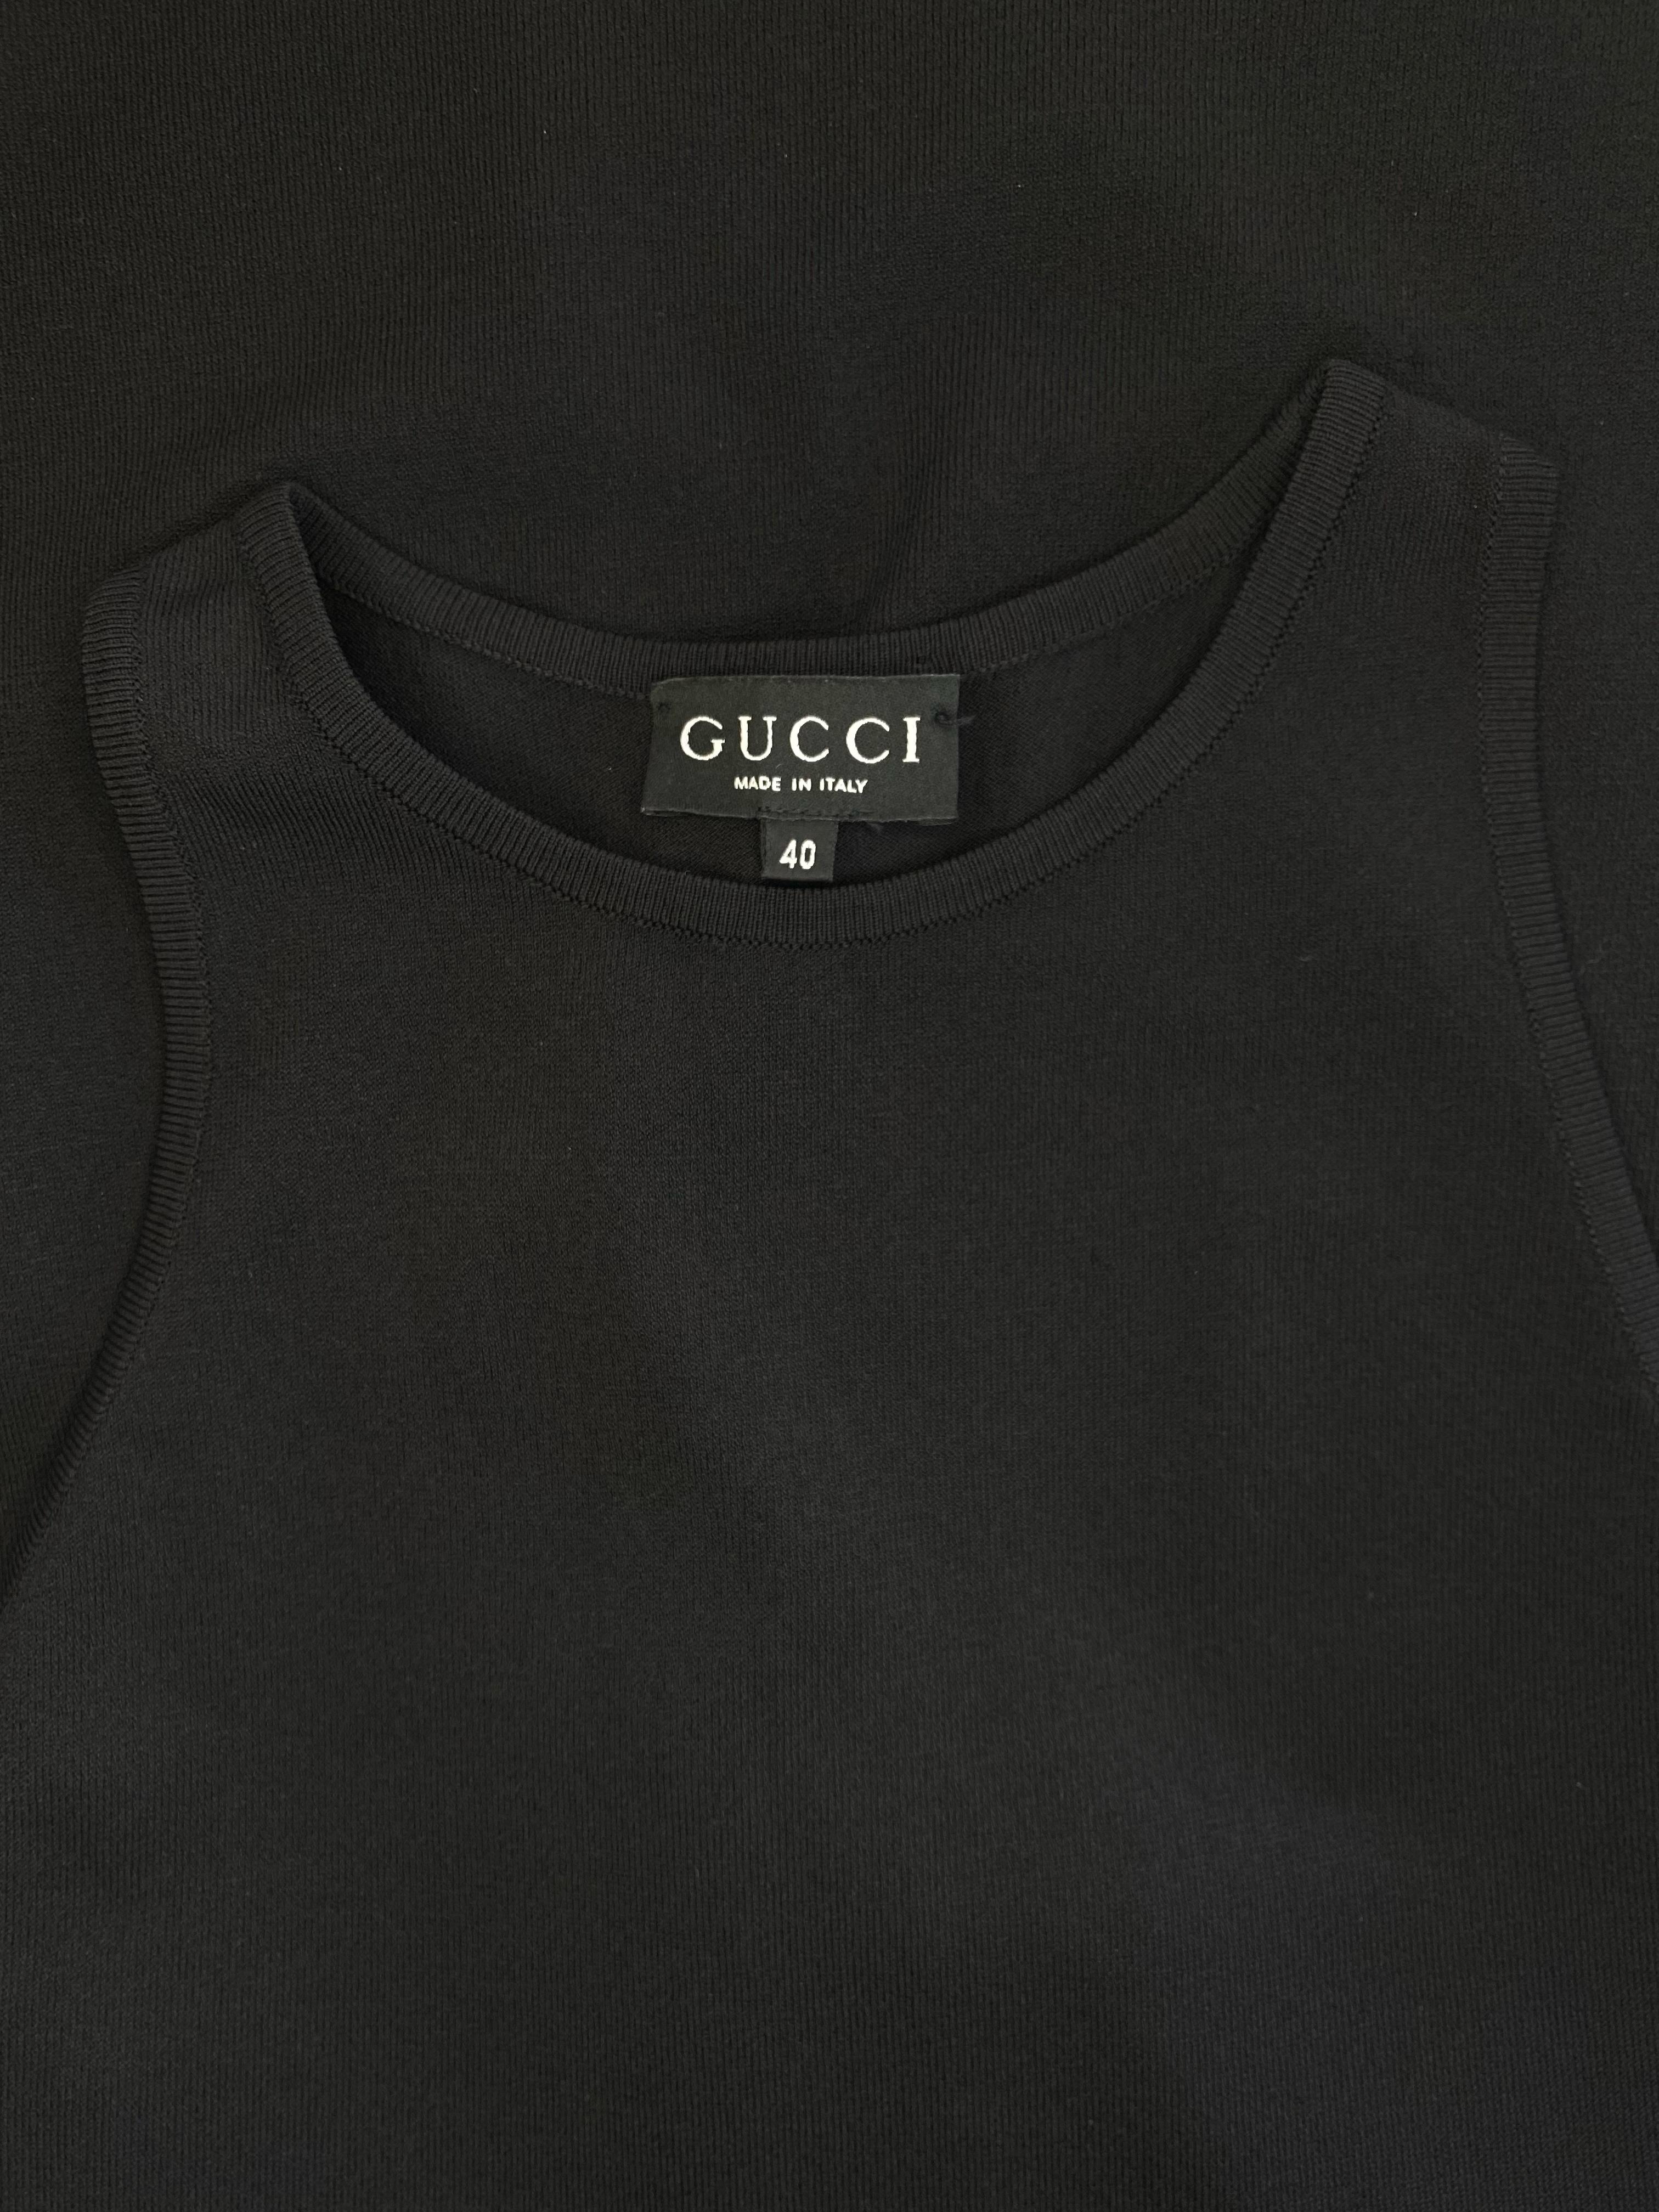 S/S 1998 Gucci by Tom Ford G Logo Buckle Racerback Knit Dress Black 1